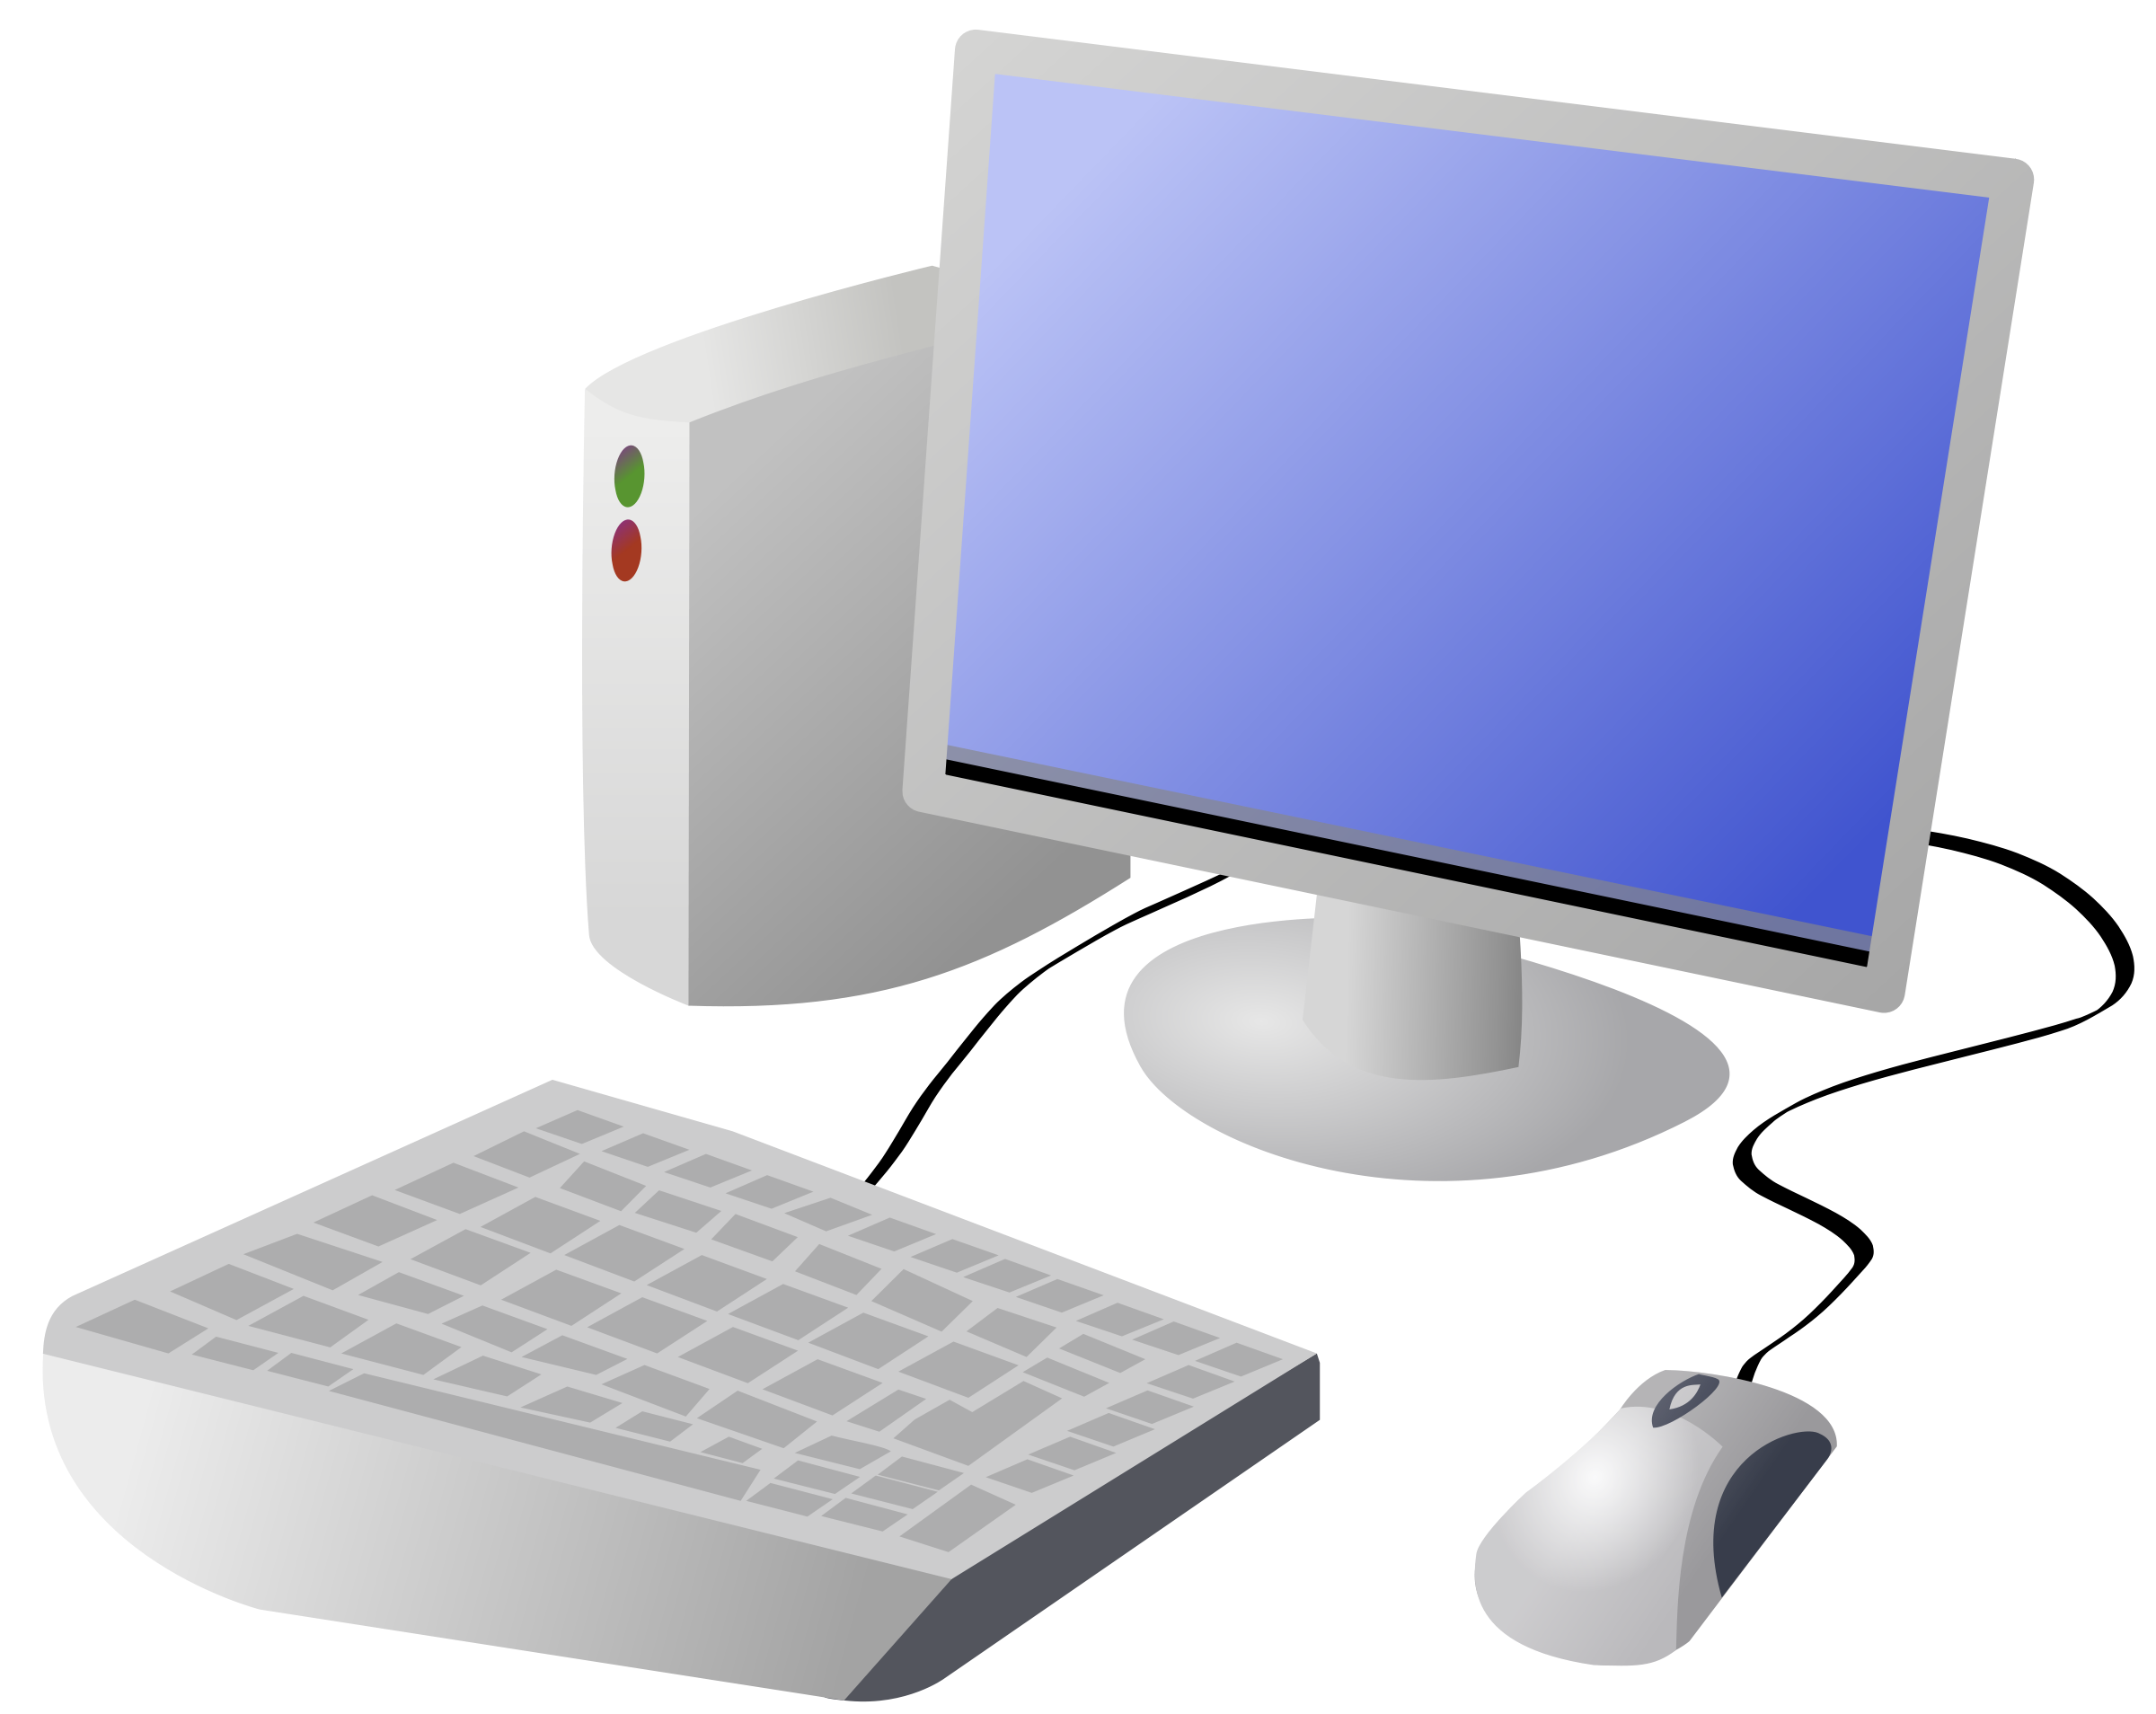 Cartoon Picture Of Computer - Clipart library